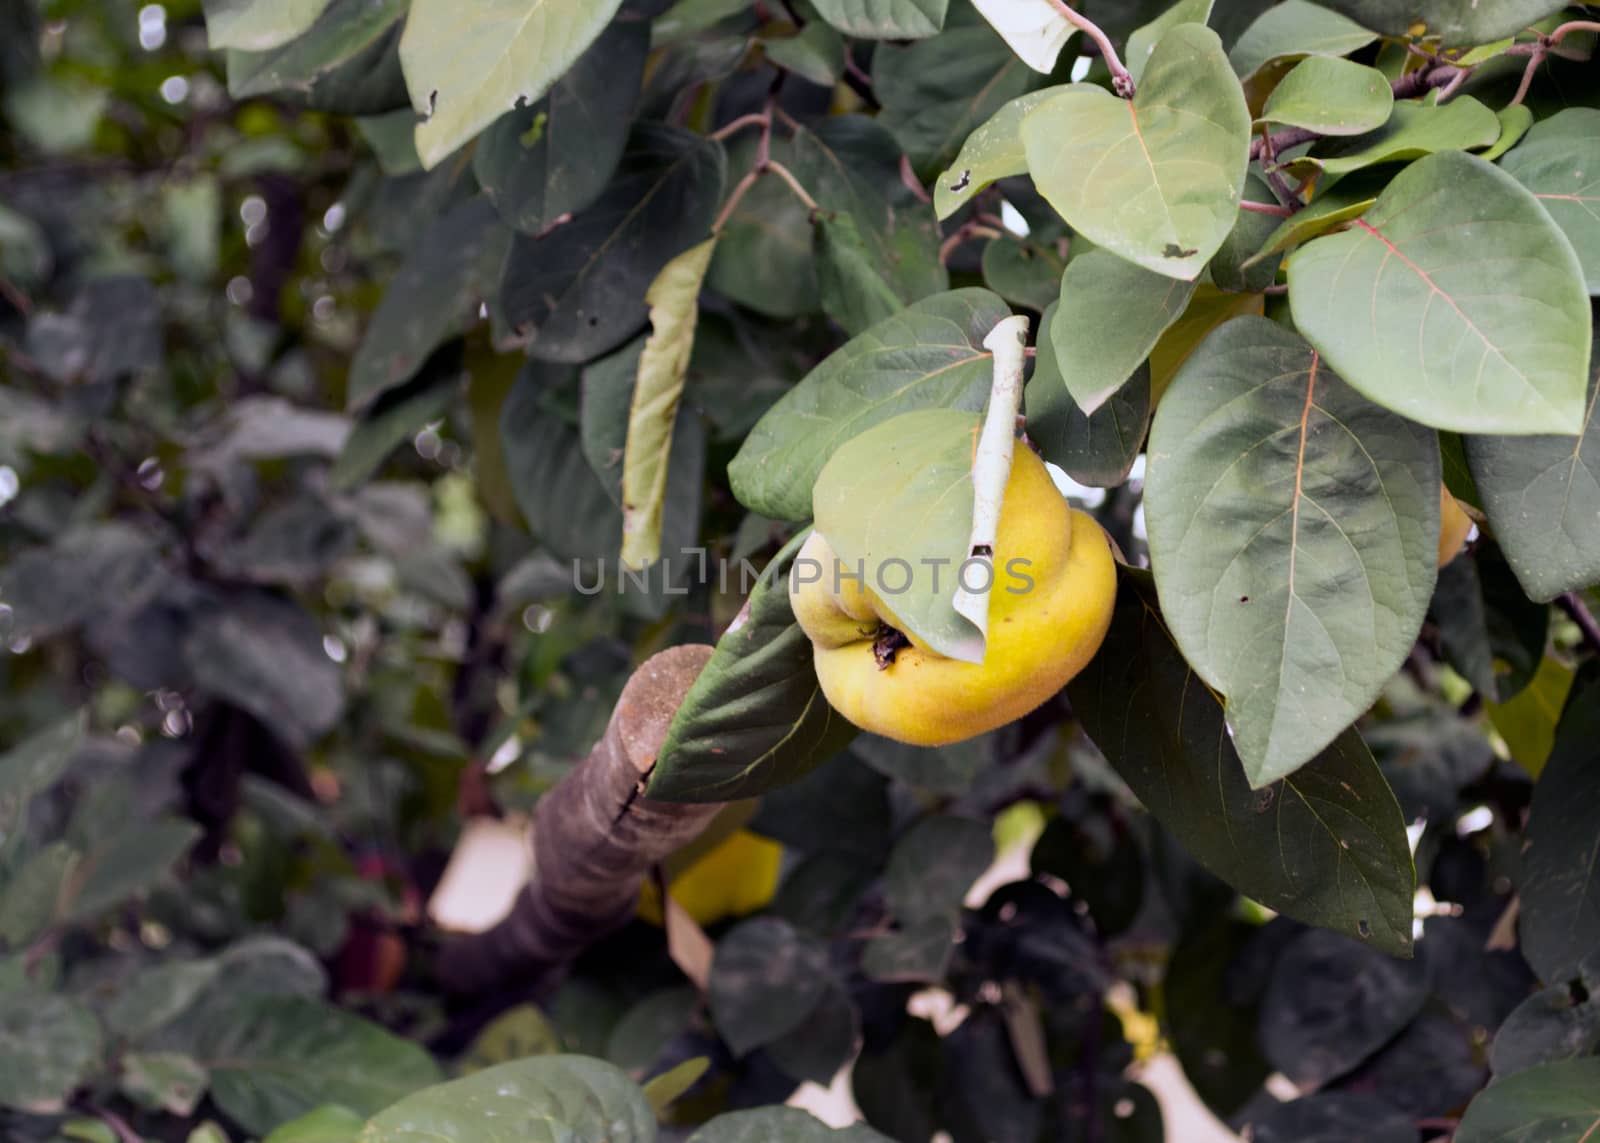 Big ripe quince fruit hanging on a tree branch, dark-green leaves frame on all sides.